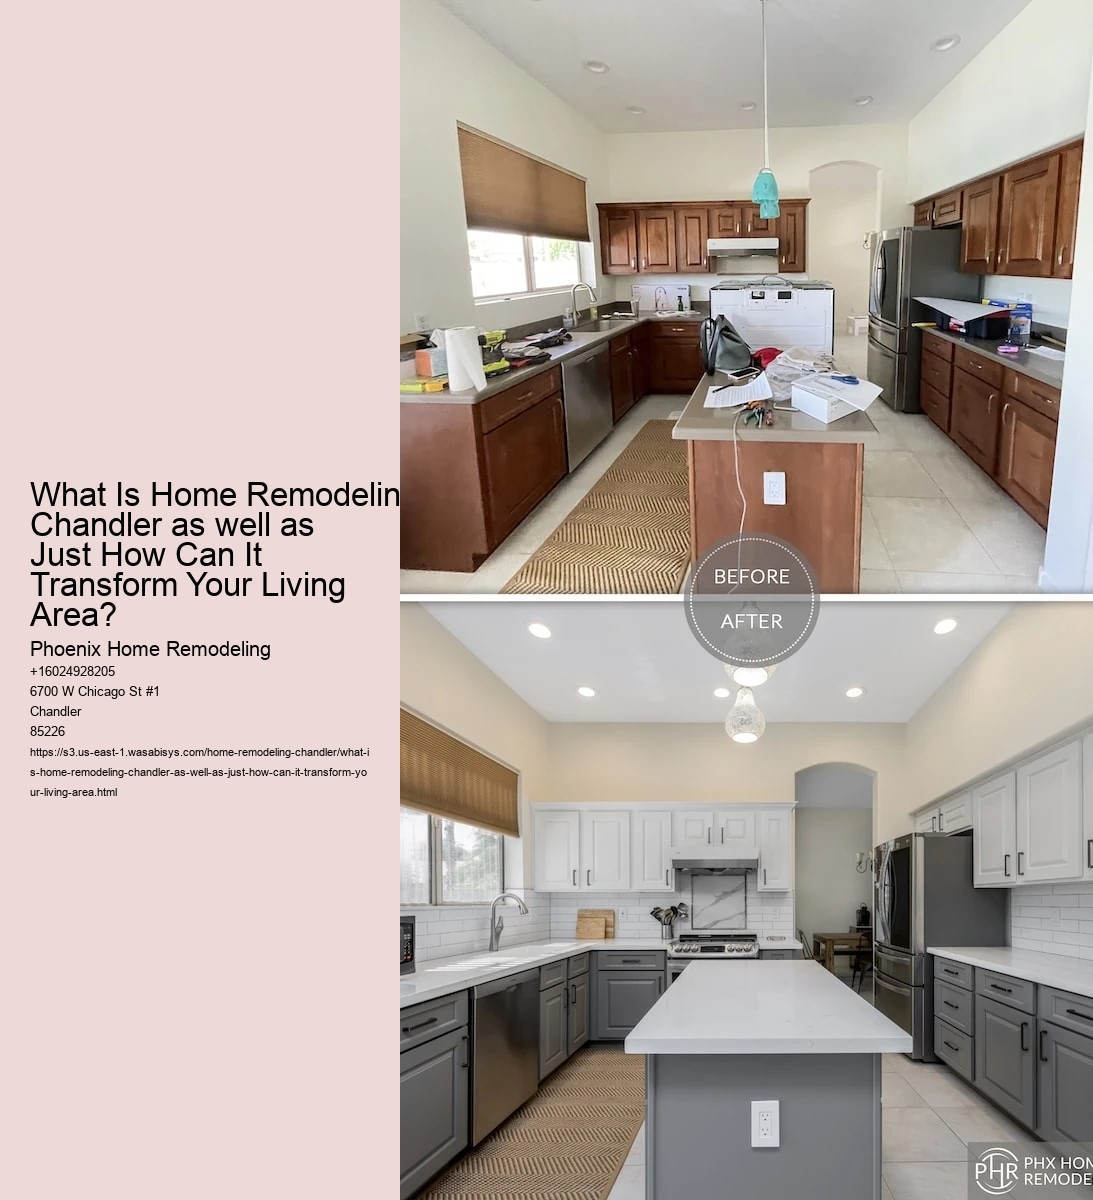 What Is Home Remodeling Chandler as well as Just How Can It Transform Your Living Area?